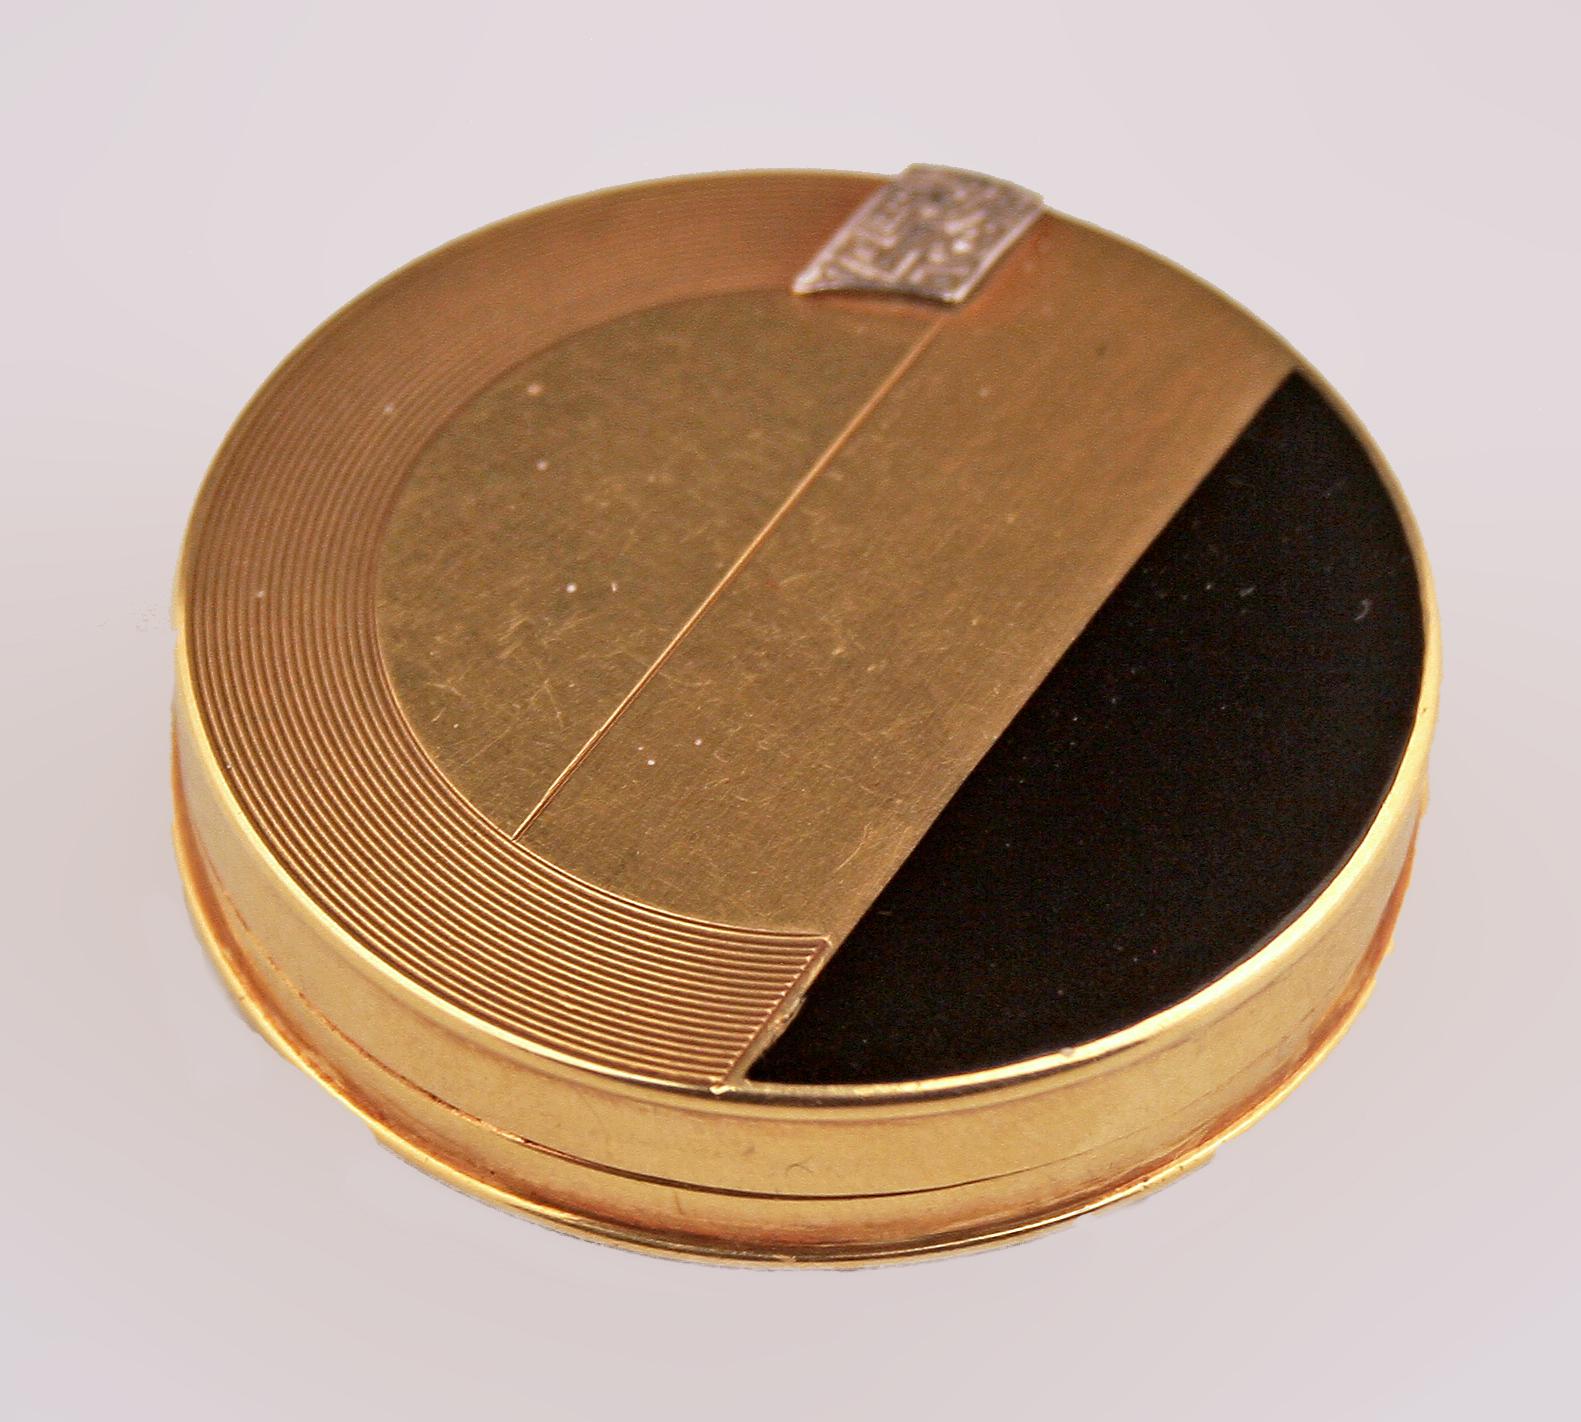 Art Deco Art Déco French Hand-Crafted 18-Karat Gold and Enamel Circular Pill/Snuff Box For Sale